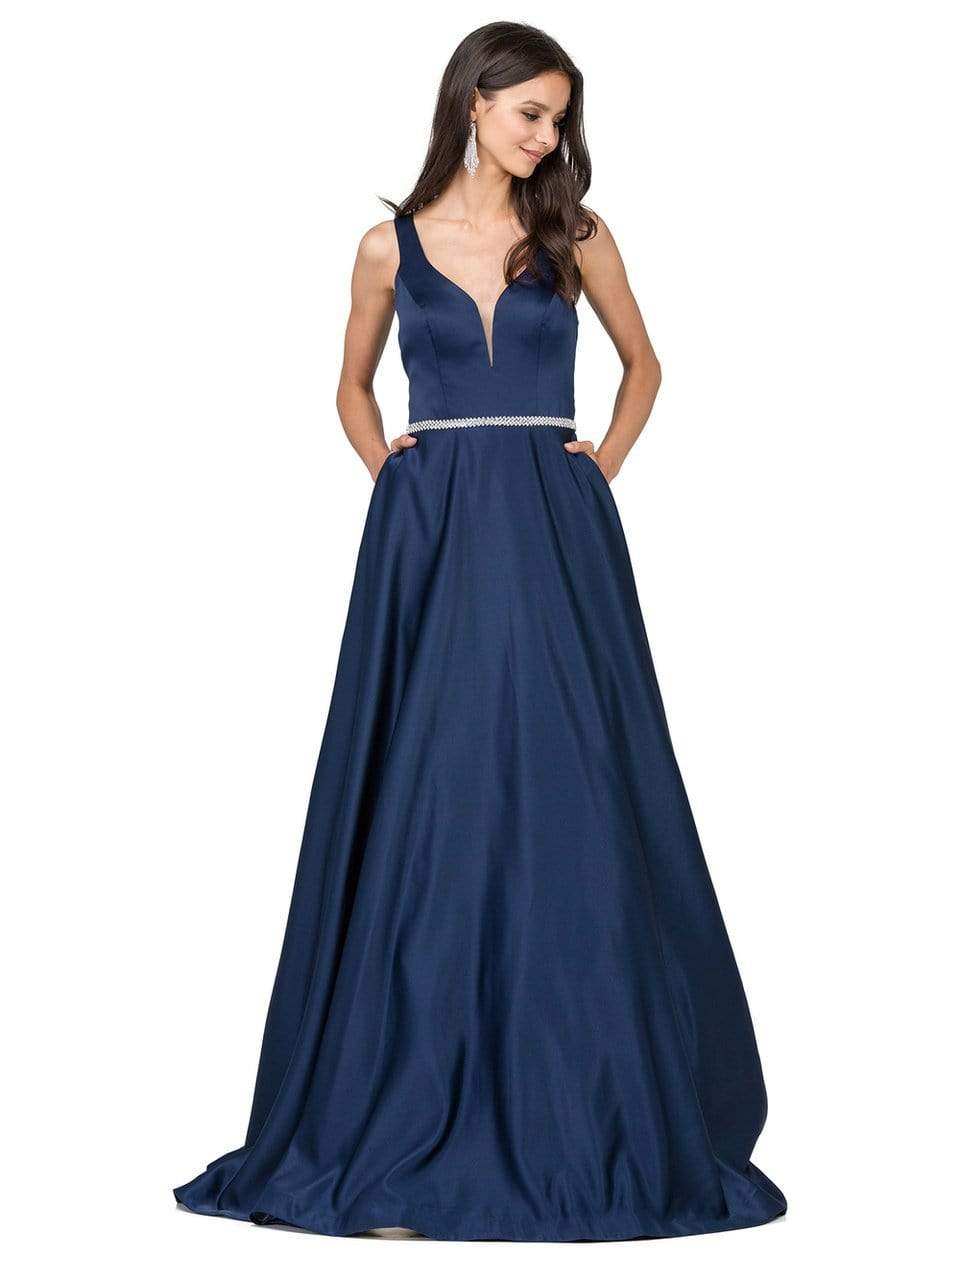 Dancing Queen Bridal - 9754 Classic Long Satin Prom Dress with V-back and Plunging Neckline Prom Dresses XS / Navy